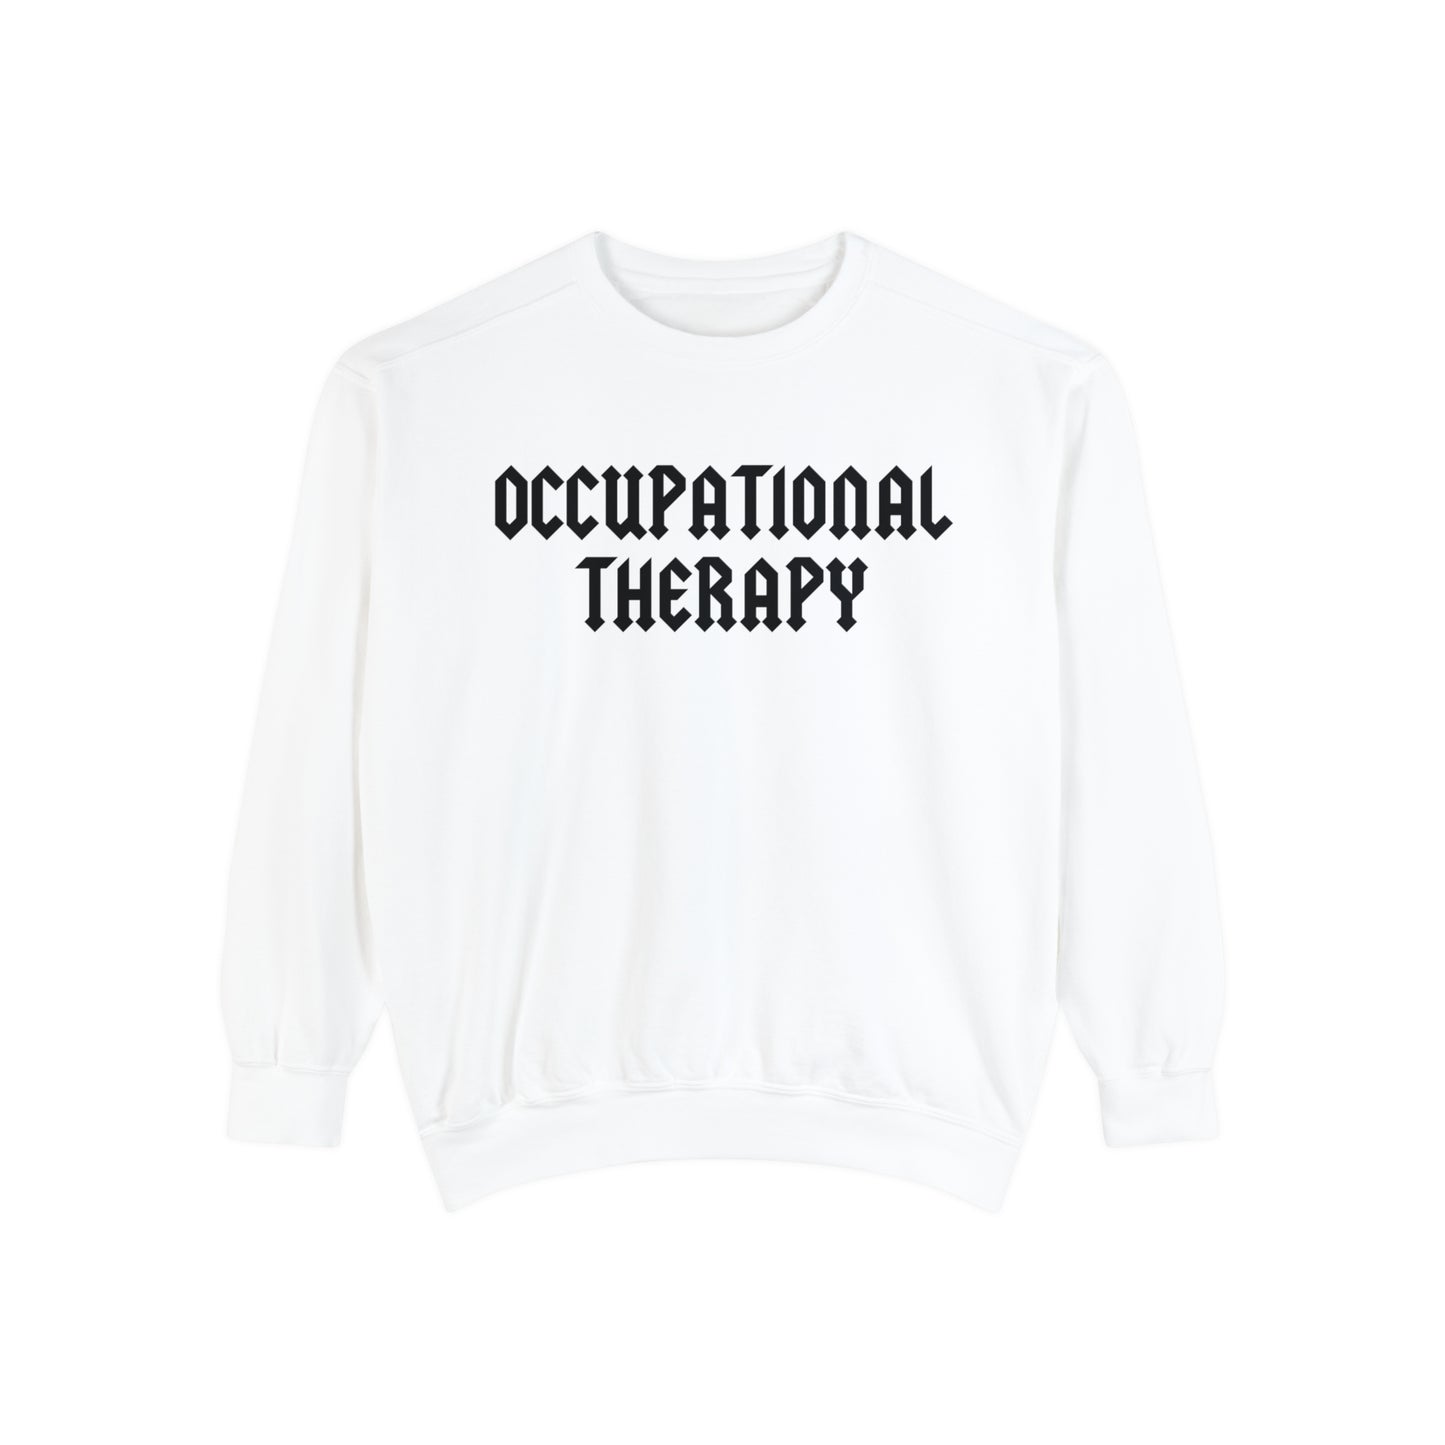 Occupational Therapy Band Inspired Comfort Colors Sweatshirt